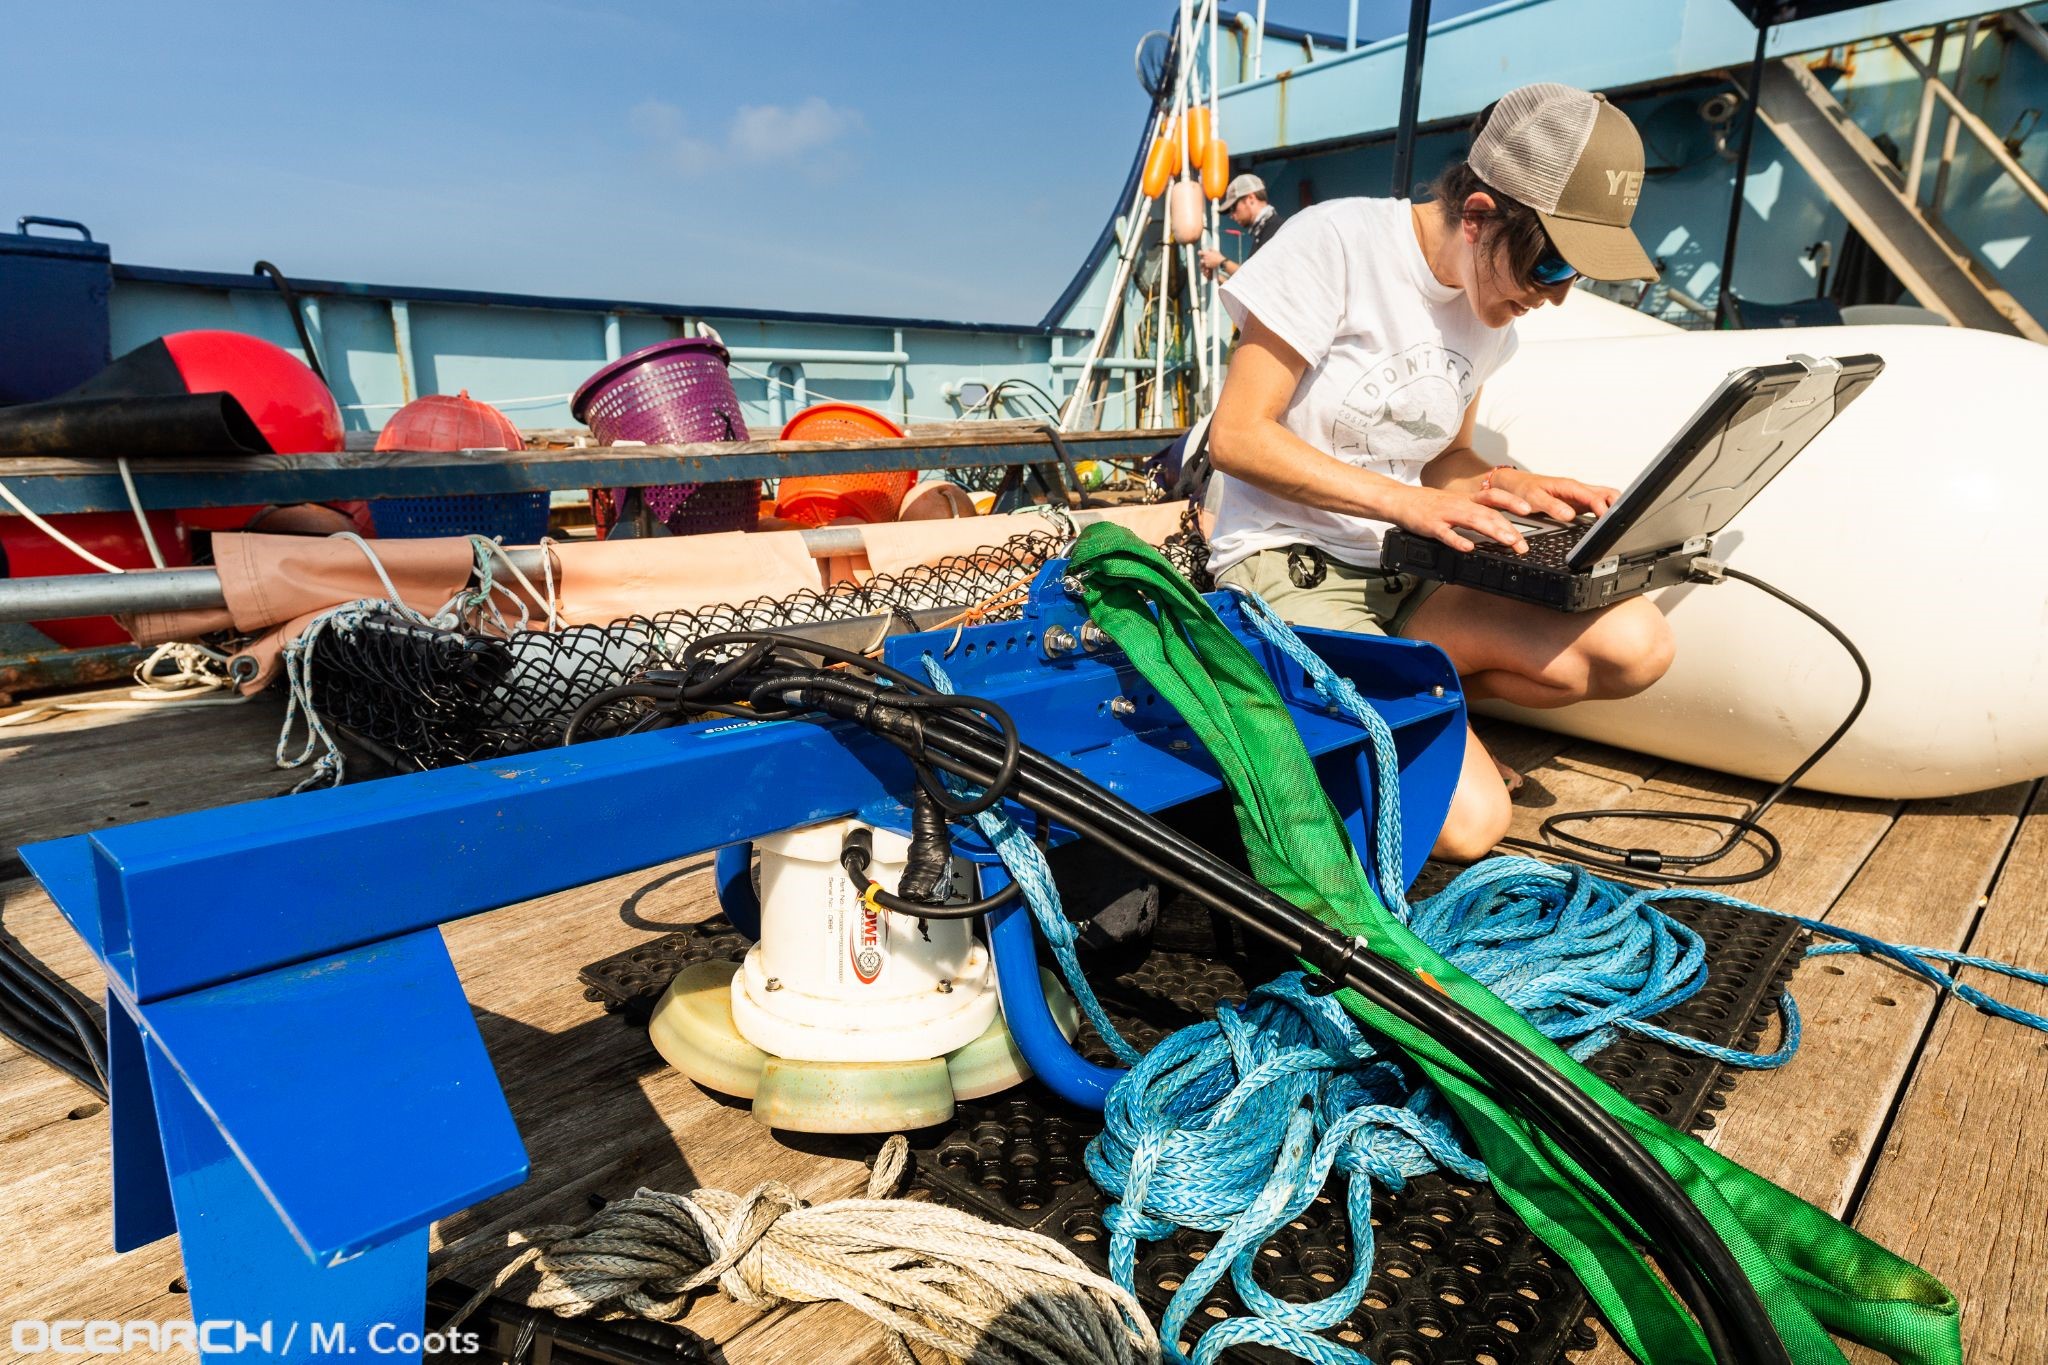 Kyla Drushka connects with the Acoustic Doppler Current Profiler before deploying it over the side of the research vessel OCEARCH.